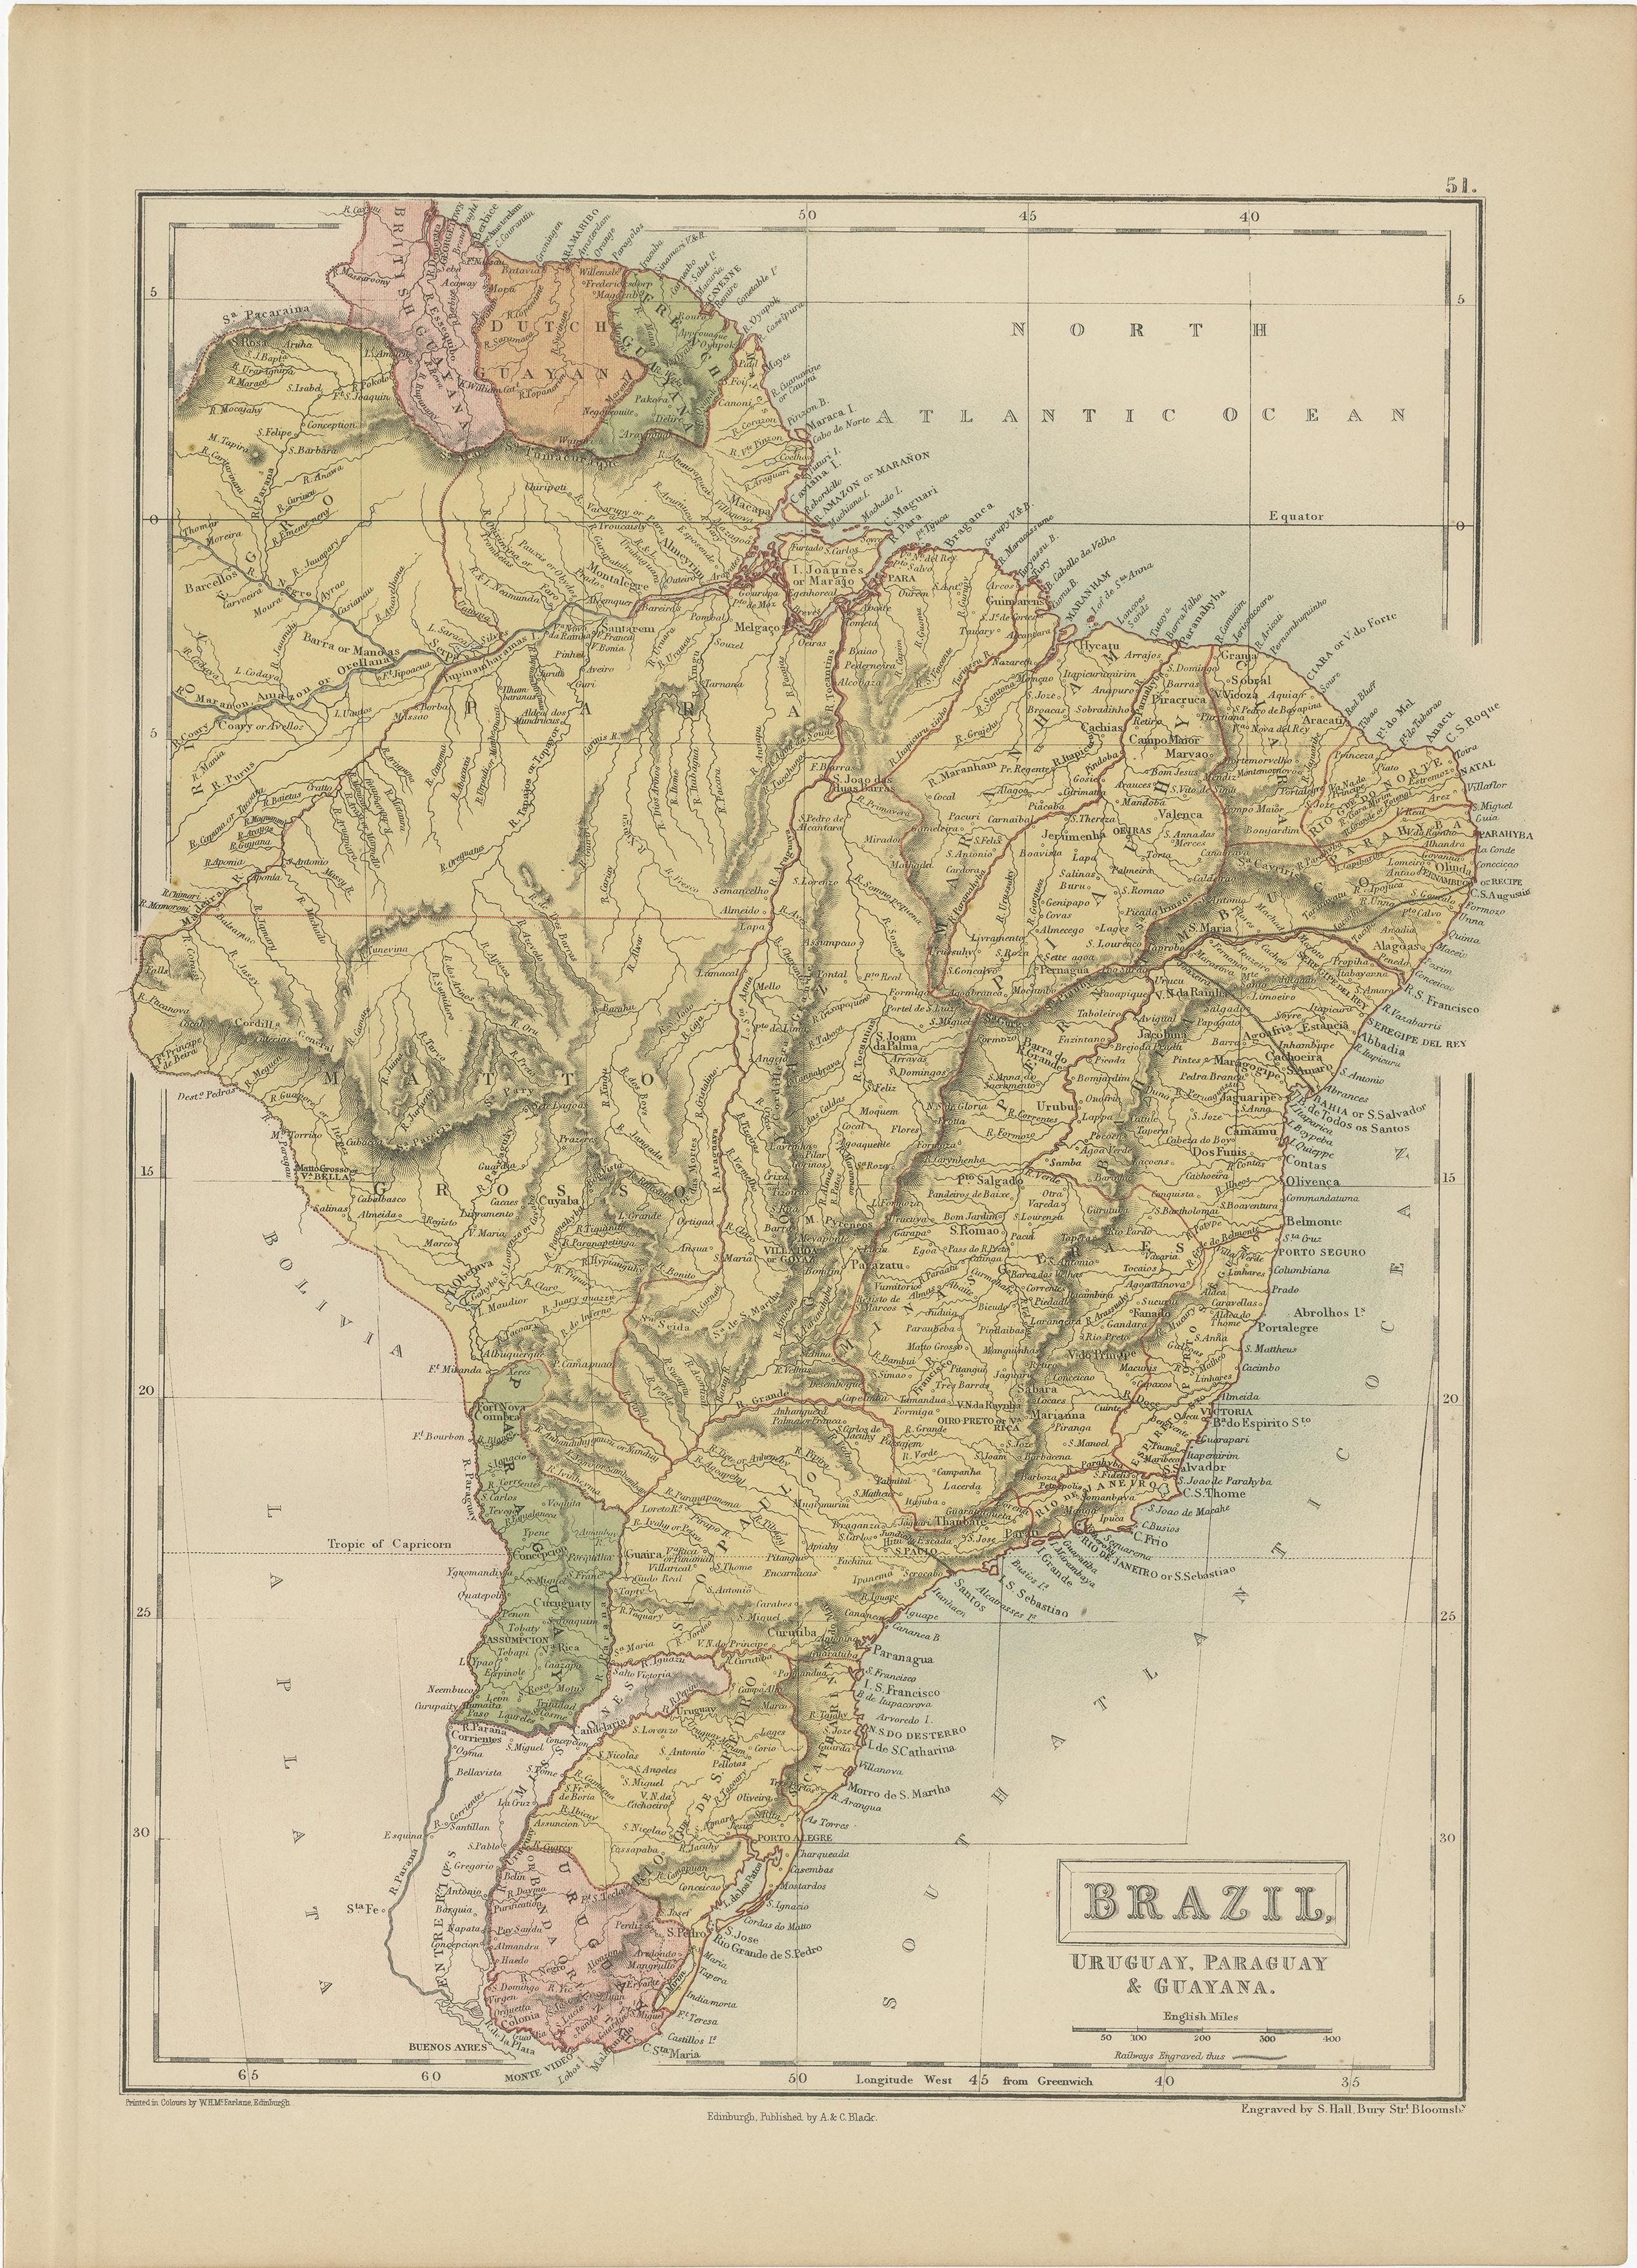 Antique map titled 'Brazil'. Original antique map of Brazil, Uruguay, Paraguay and Guyana. This map originates from ‘Black's General Atlas of The World’. Published by A & C. Black, 1870.